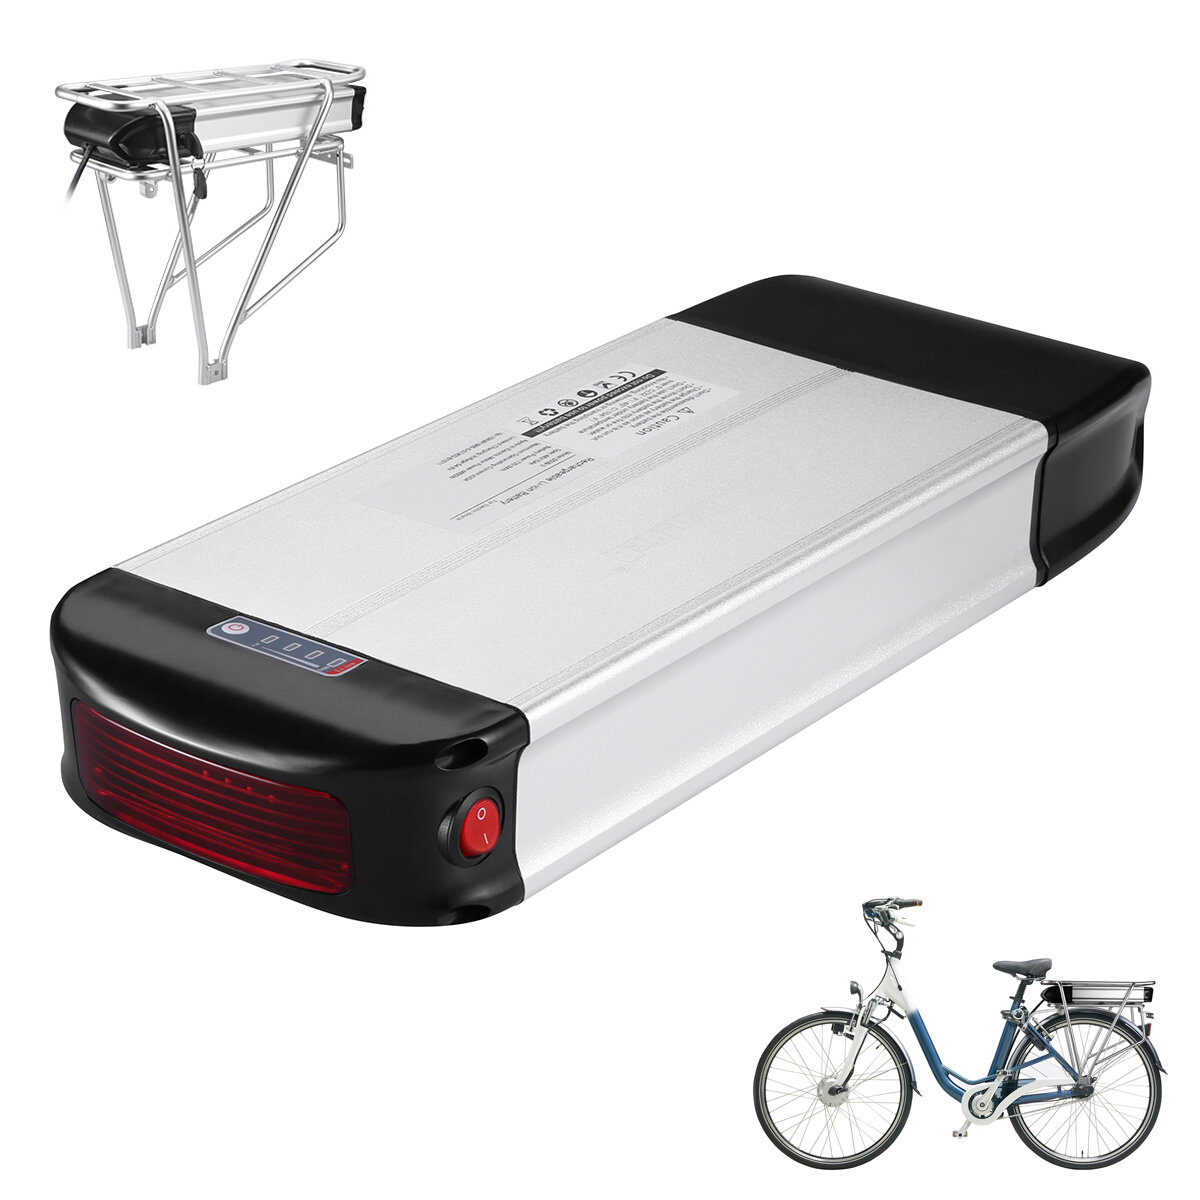 [EU/USA Direct] HANIWINNER HA074-04 36V 20Ah 720W E-bike Battery Rechargeable Lithium Li-ion Battery with Rear Bike Frame & Taillight for Electric Bicycle